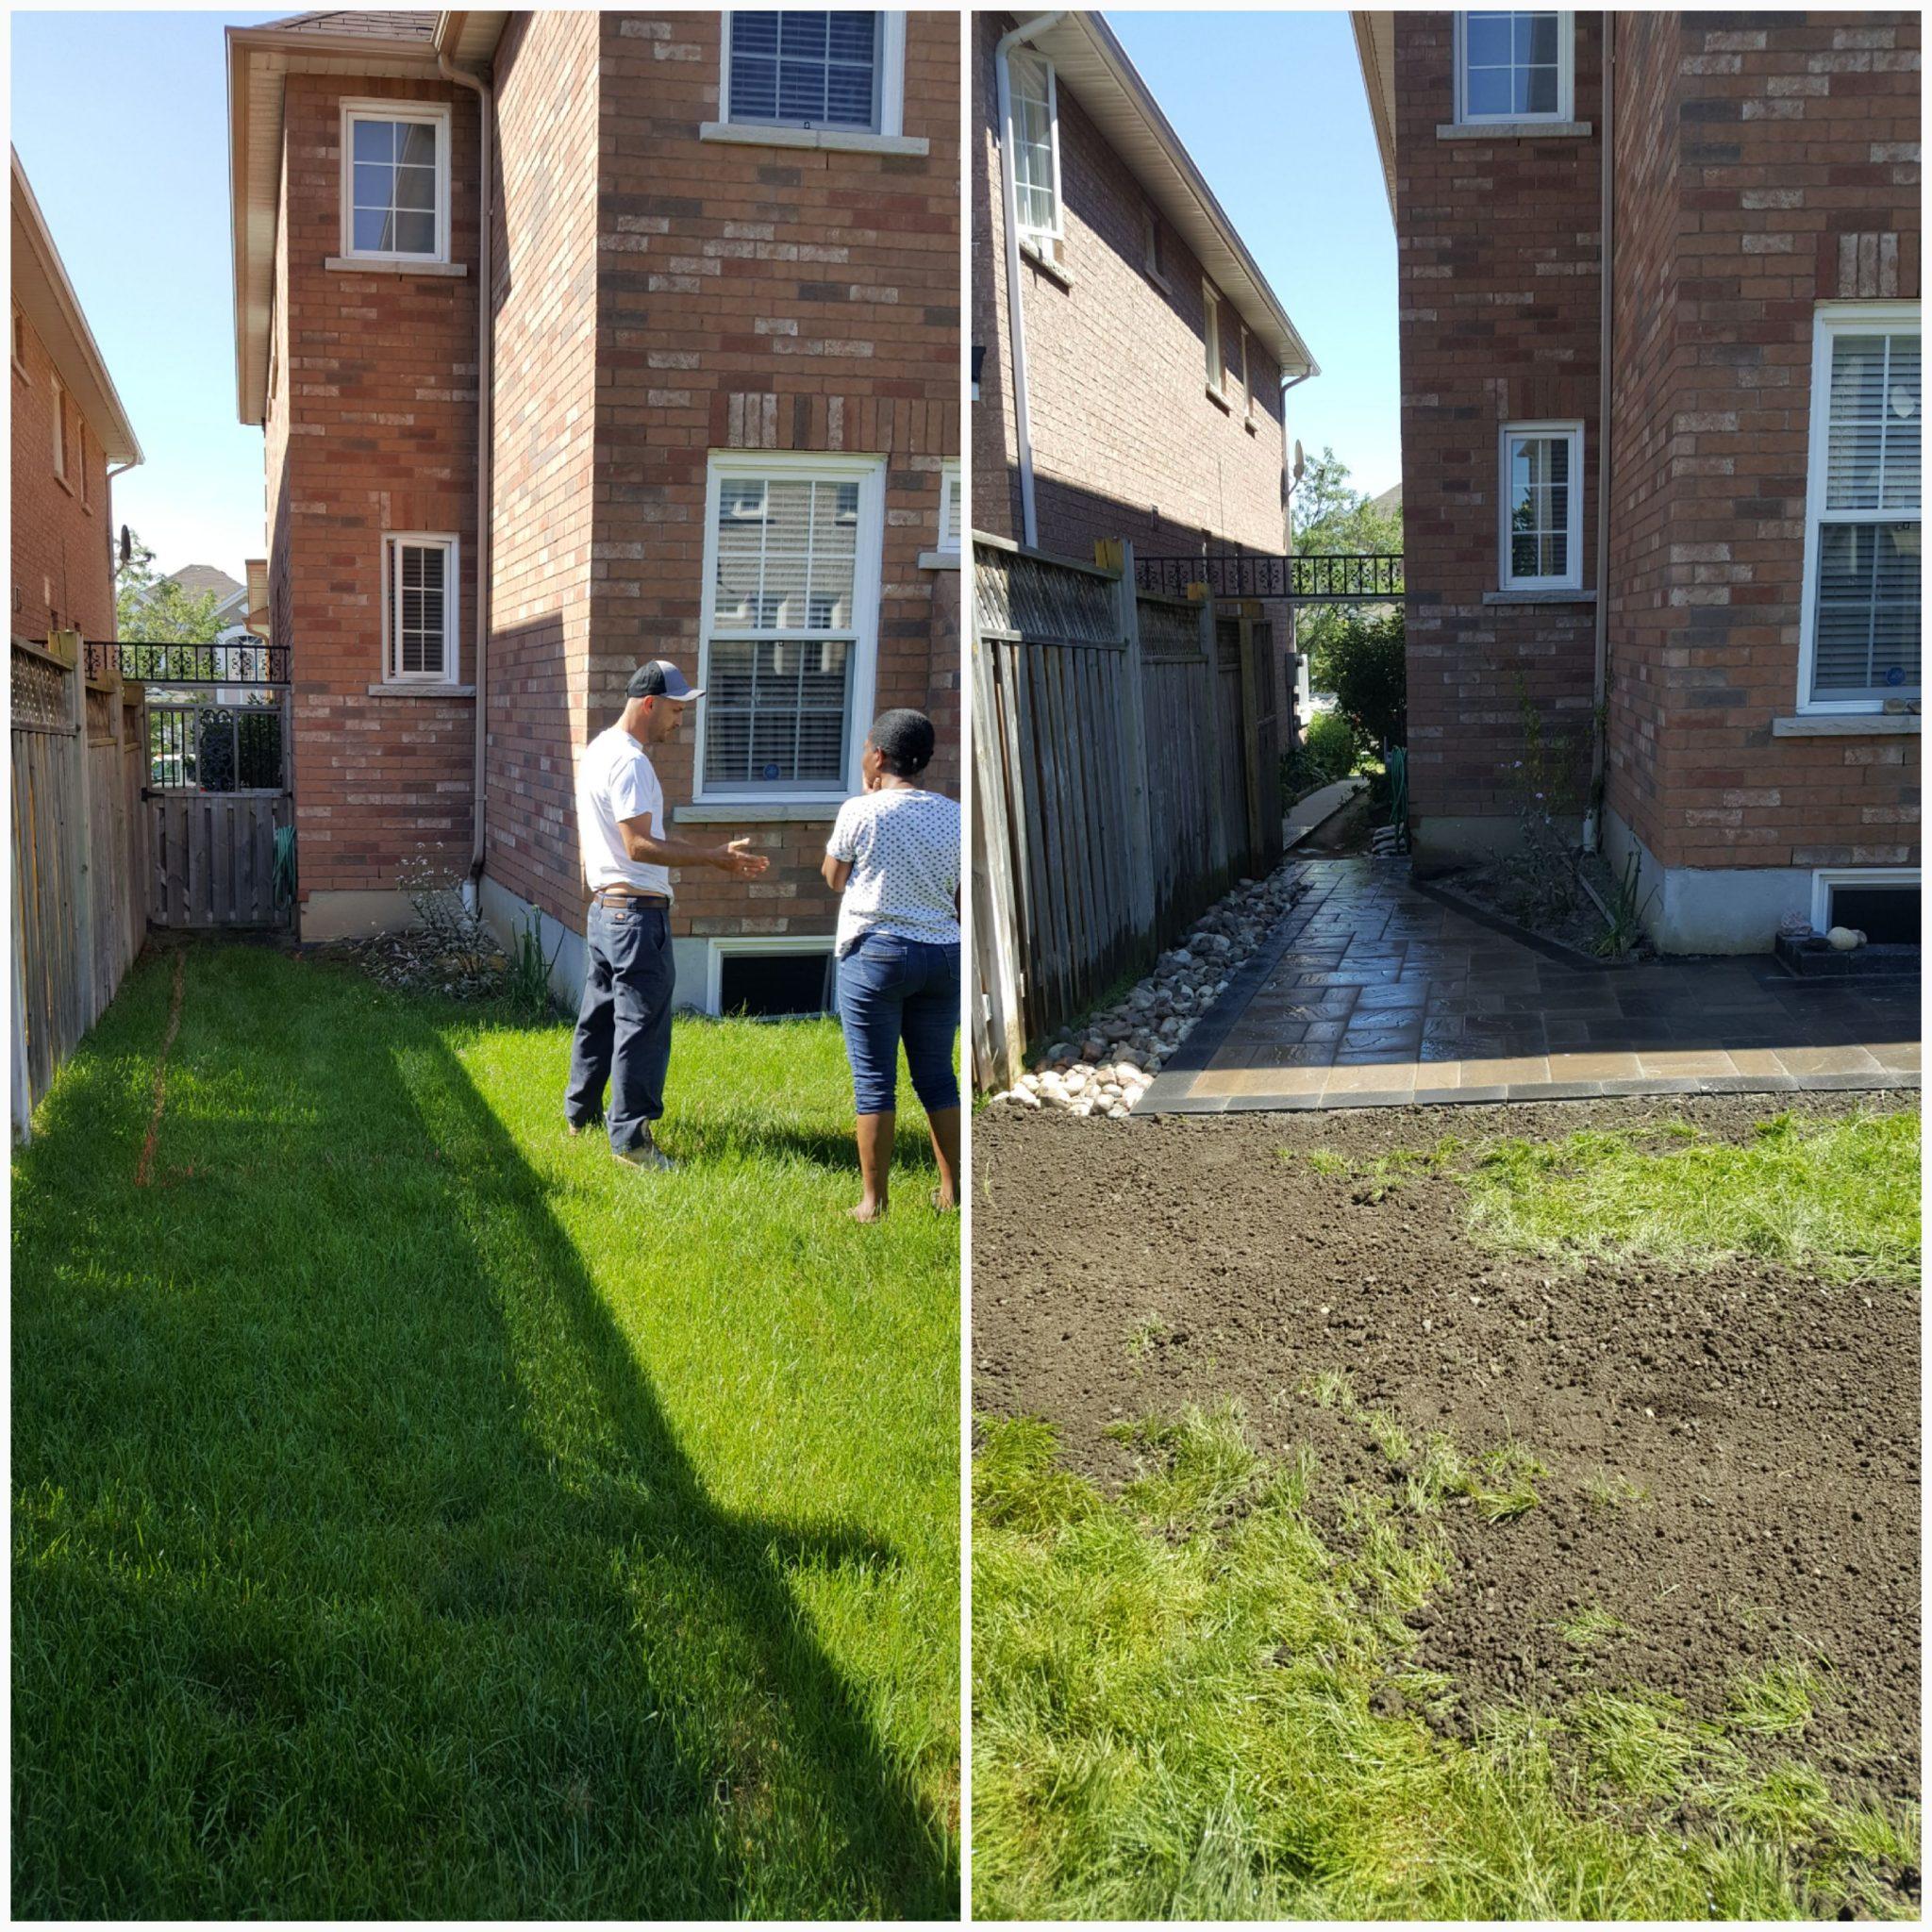 Do You Have Drainage Issues In Your Yard Jrc Landscaping Property And Yard Maintenance Fall Clean Ups And Snow Removal Services